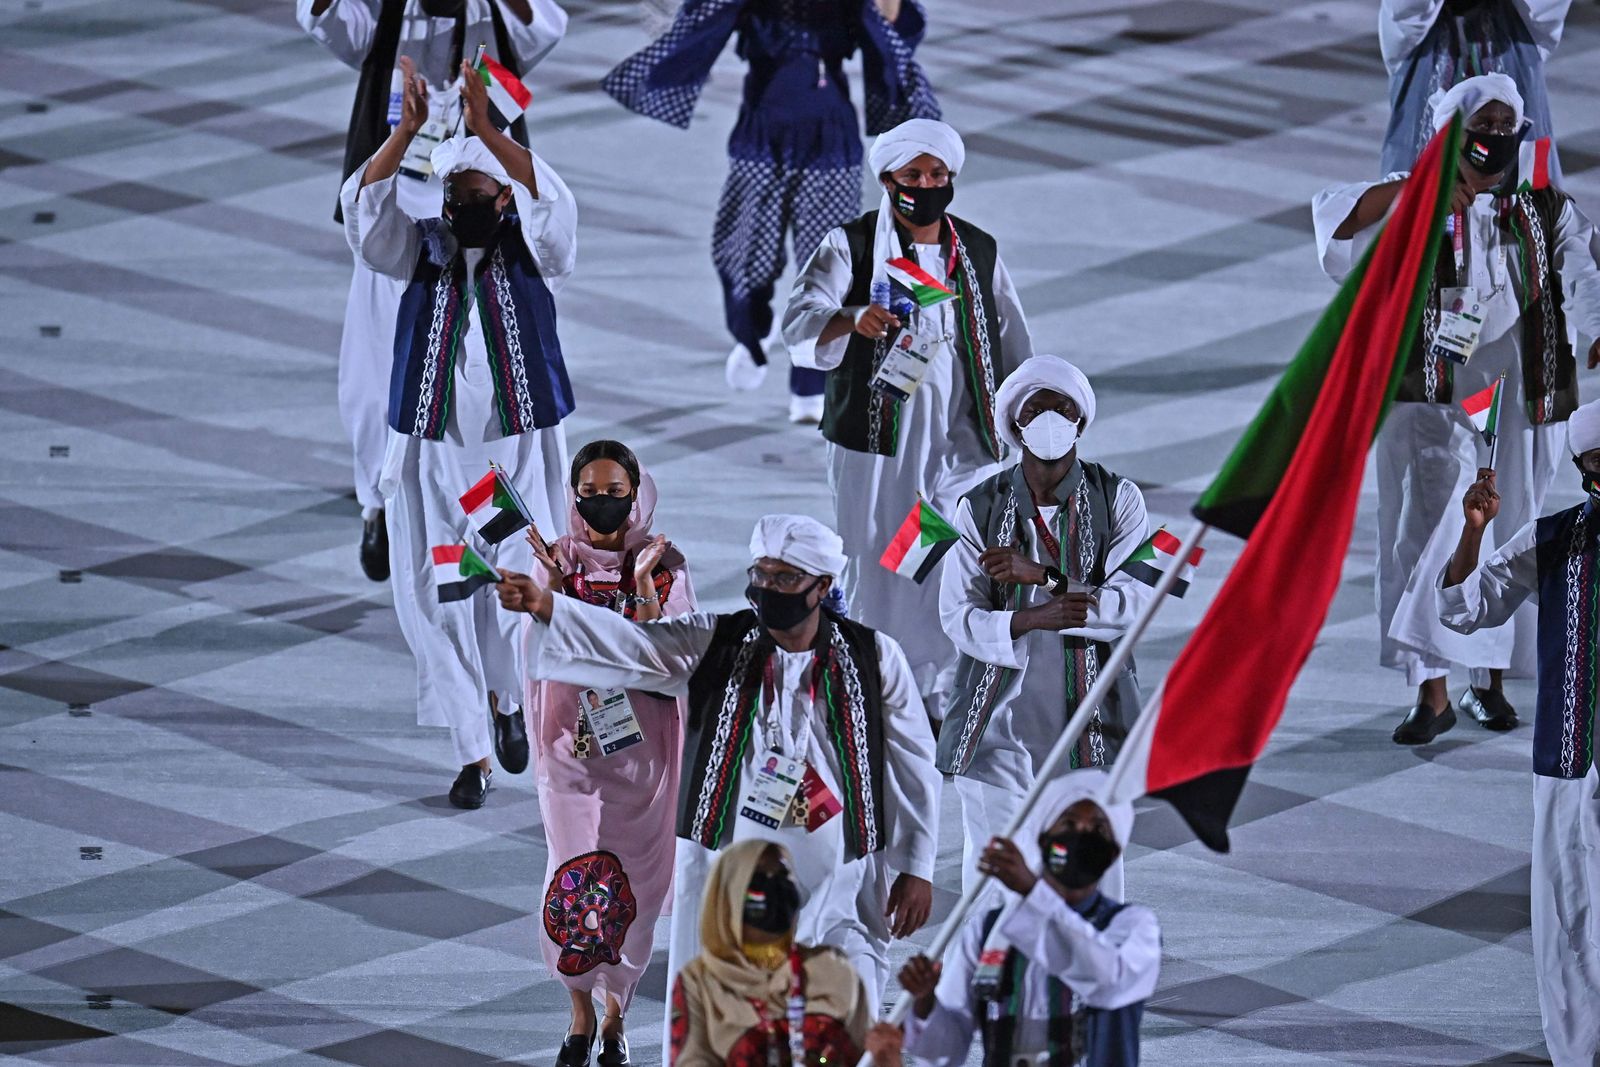 Sudan's flag bearer Esraa Mohamed Ahmed Mohamed  and Sudan's flag bearer Abobakr Abass lead the delegation during the opening ceremony of the Tokyo 2020 Olympic Games, at the Olympic Stadium, in Tokyo, on July 23, 2021. (Photo by Ben STANSALL / AFP) - AFP